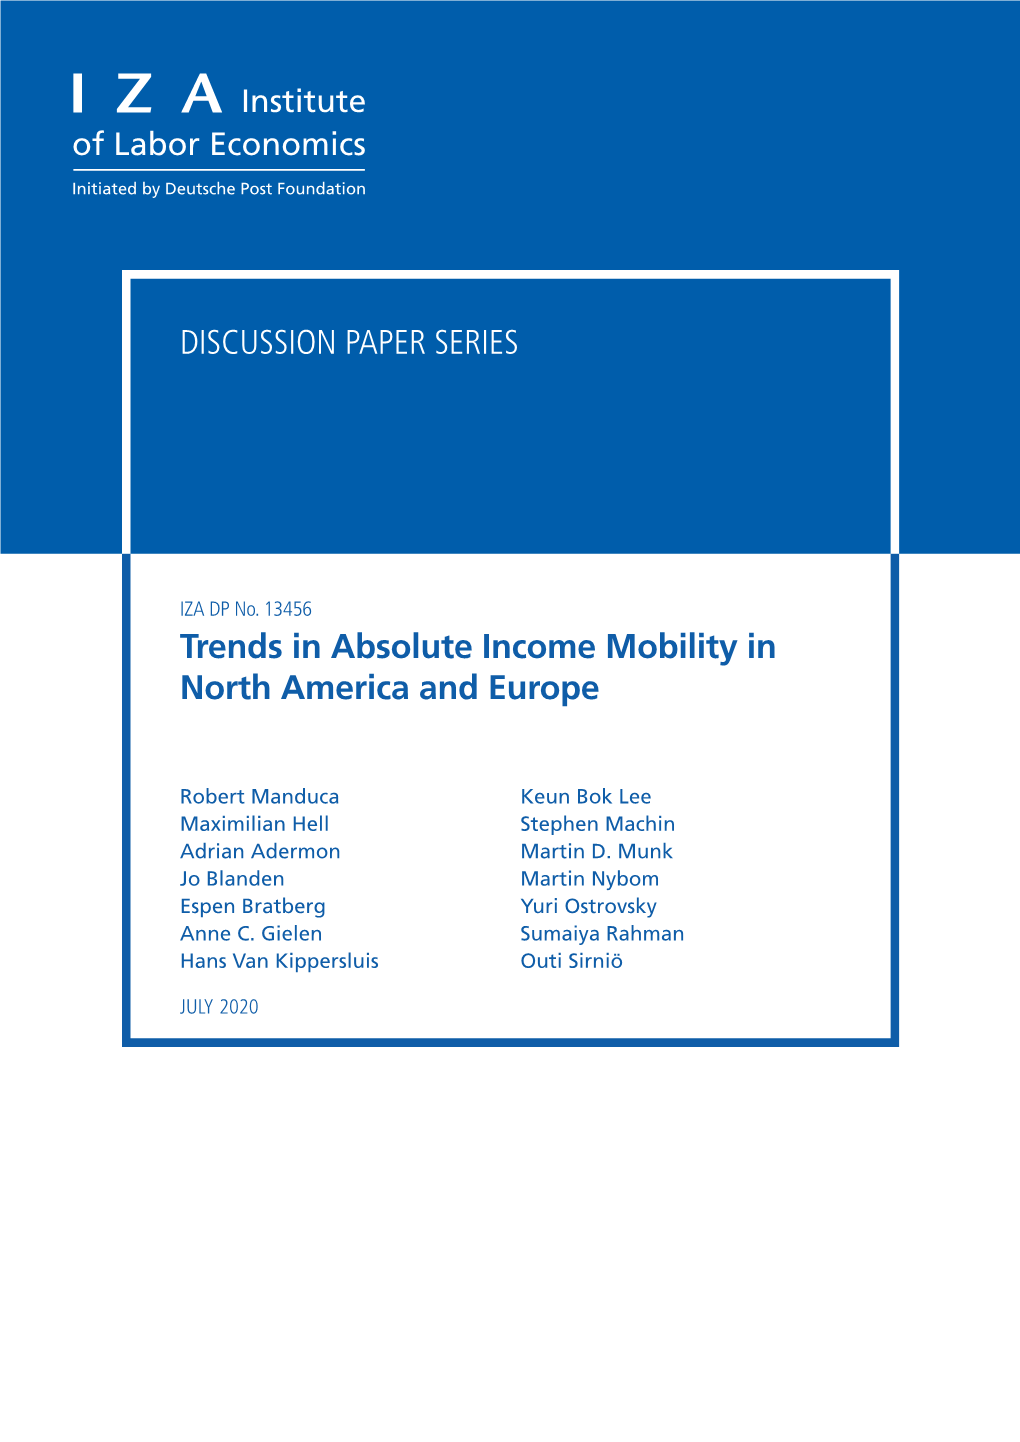 Trends in Absolute Income Mobility in North America and Europe